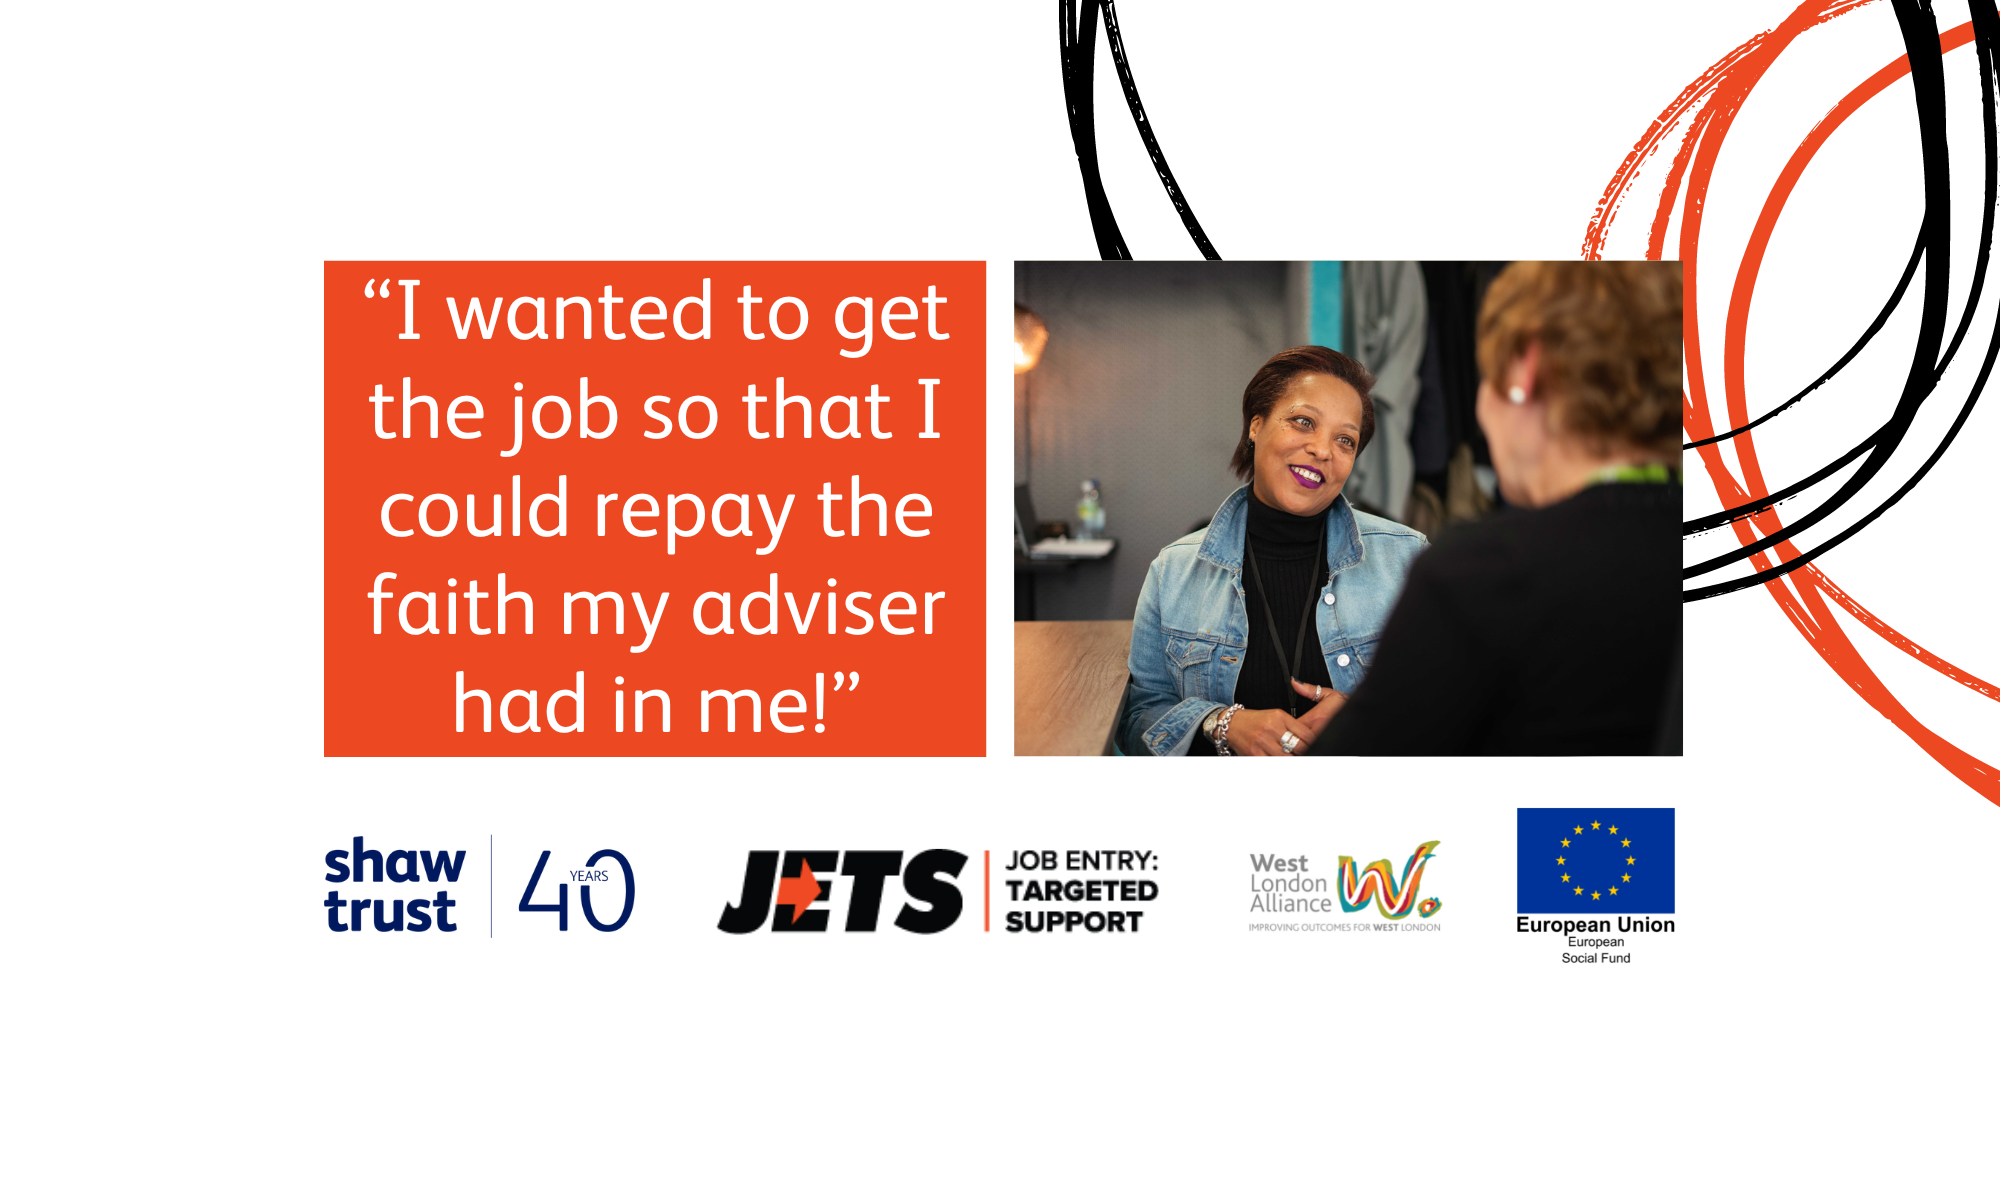 “I wanted to get the job so that I could repay the faith my adviser had in me!”